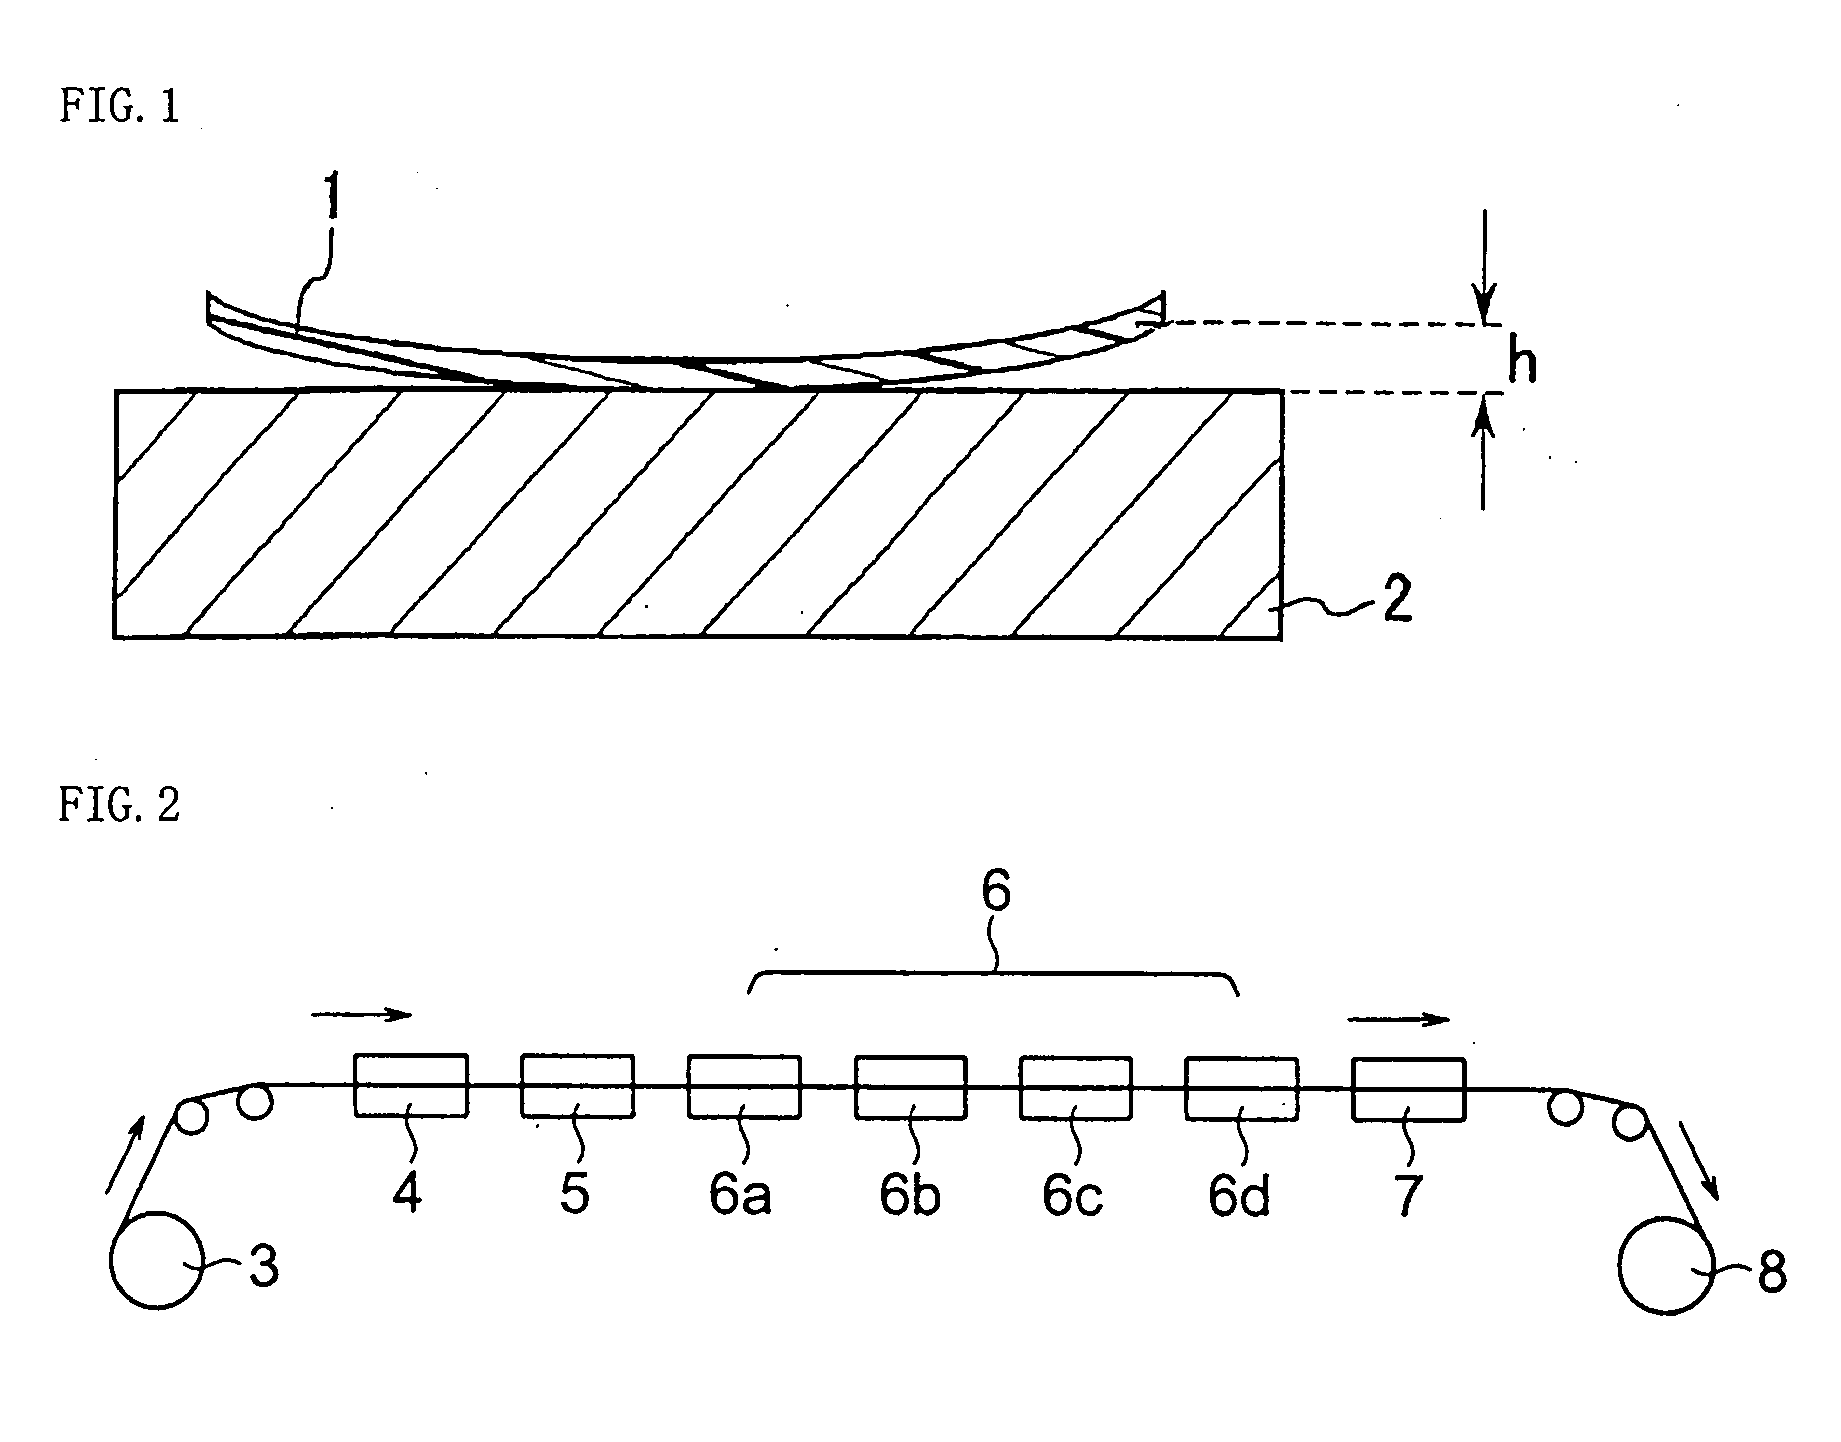 Protective Film For Polarizing Plate, Method For Preparation Thereof, Polarizing Plate With Antireflection Function, And Optical Article